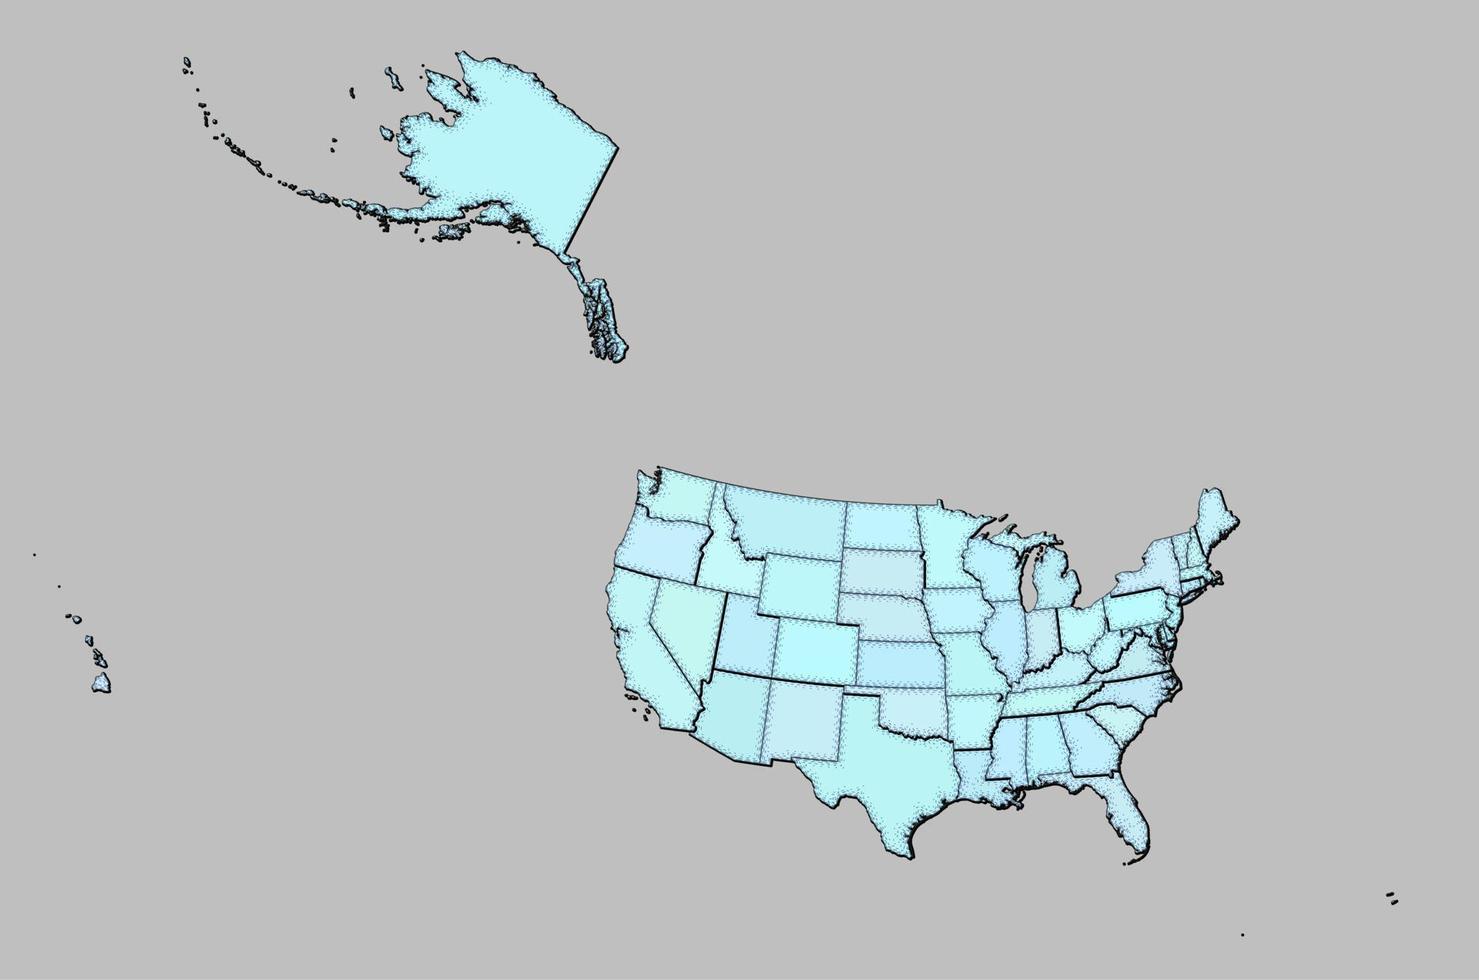 United States of America map with states isolated vector